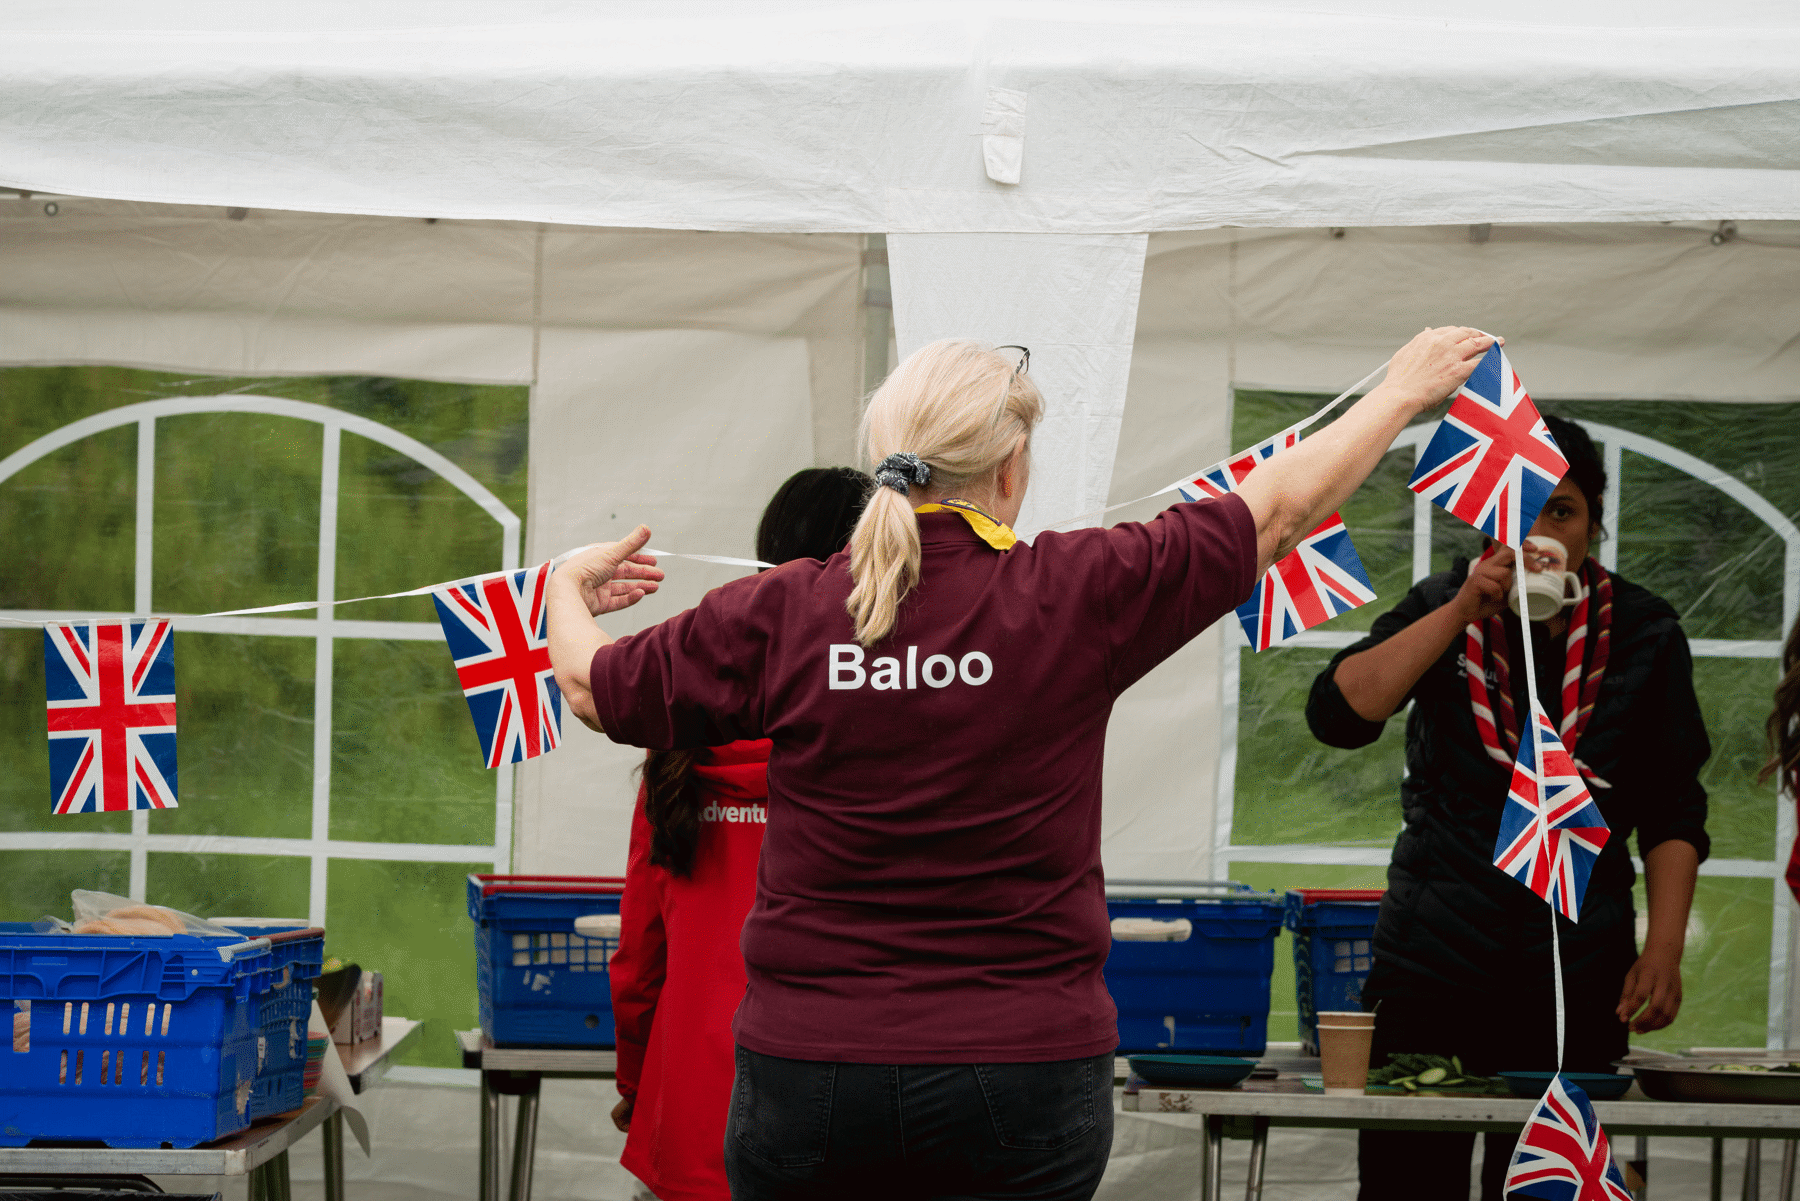 A volunteer putting up bunting at a local event